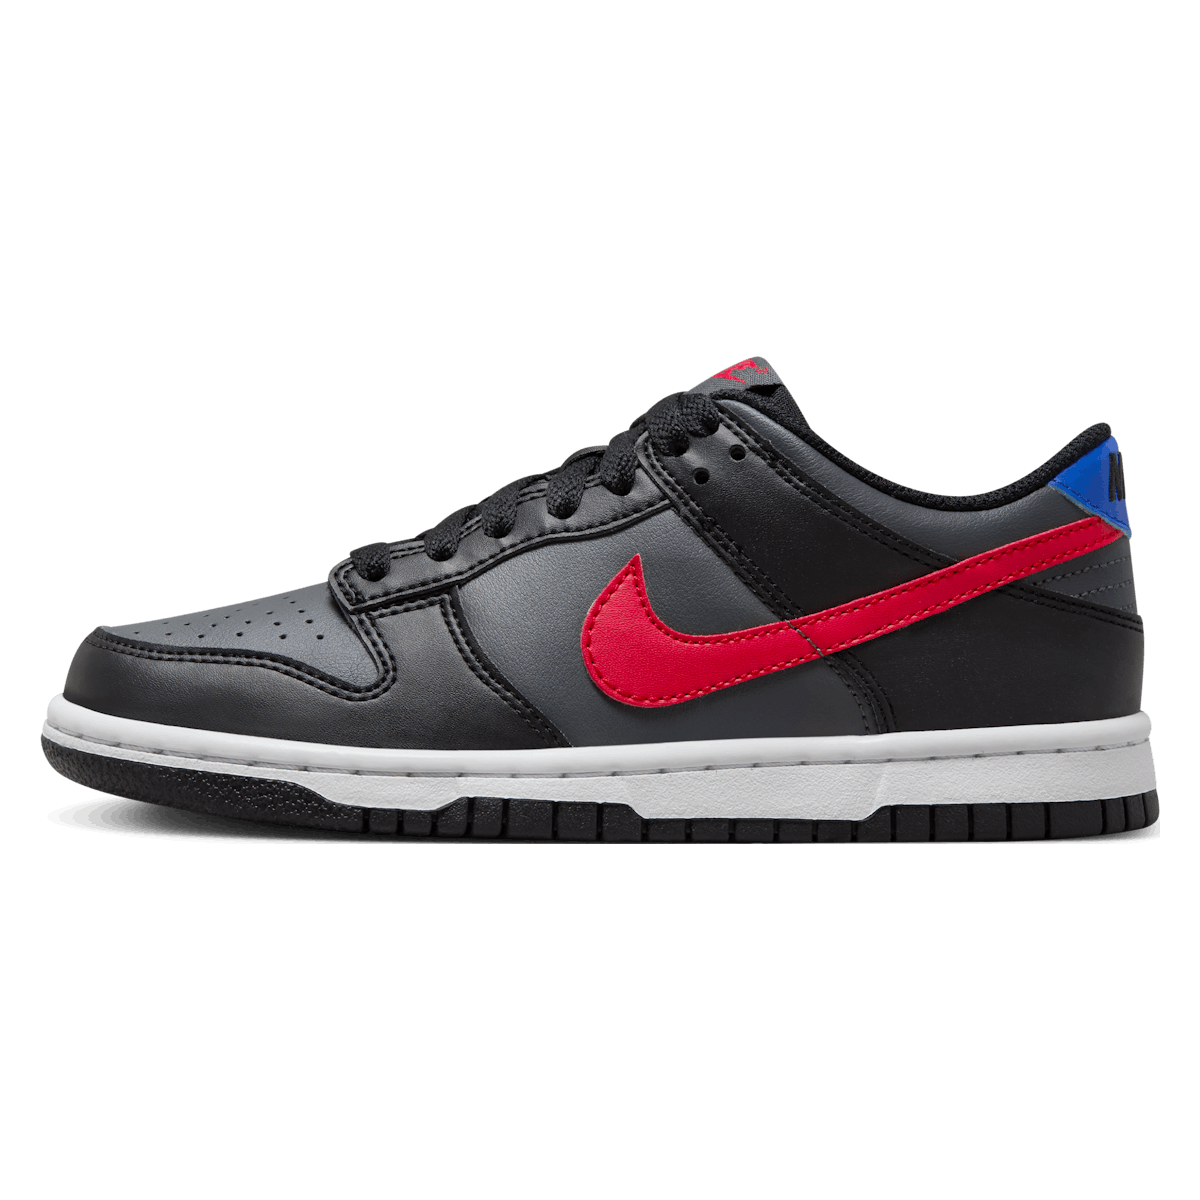 Nike Dunk Low GS "Racer Blue/University Red"